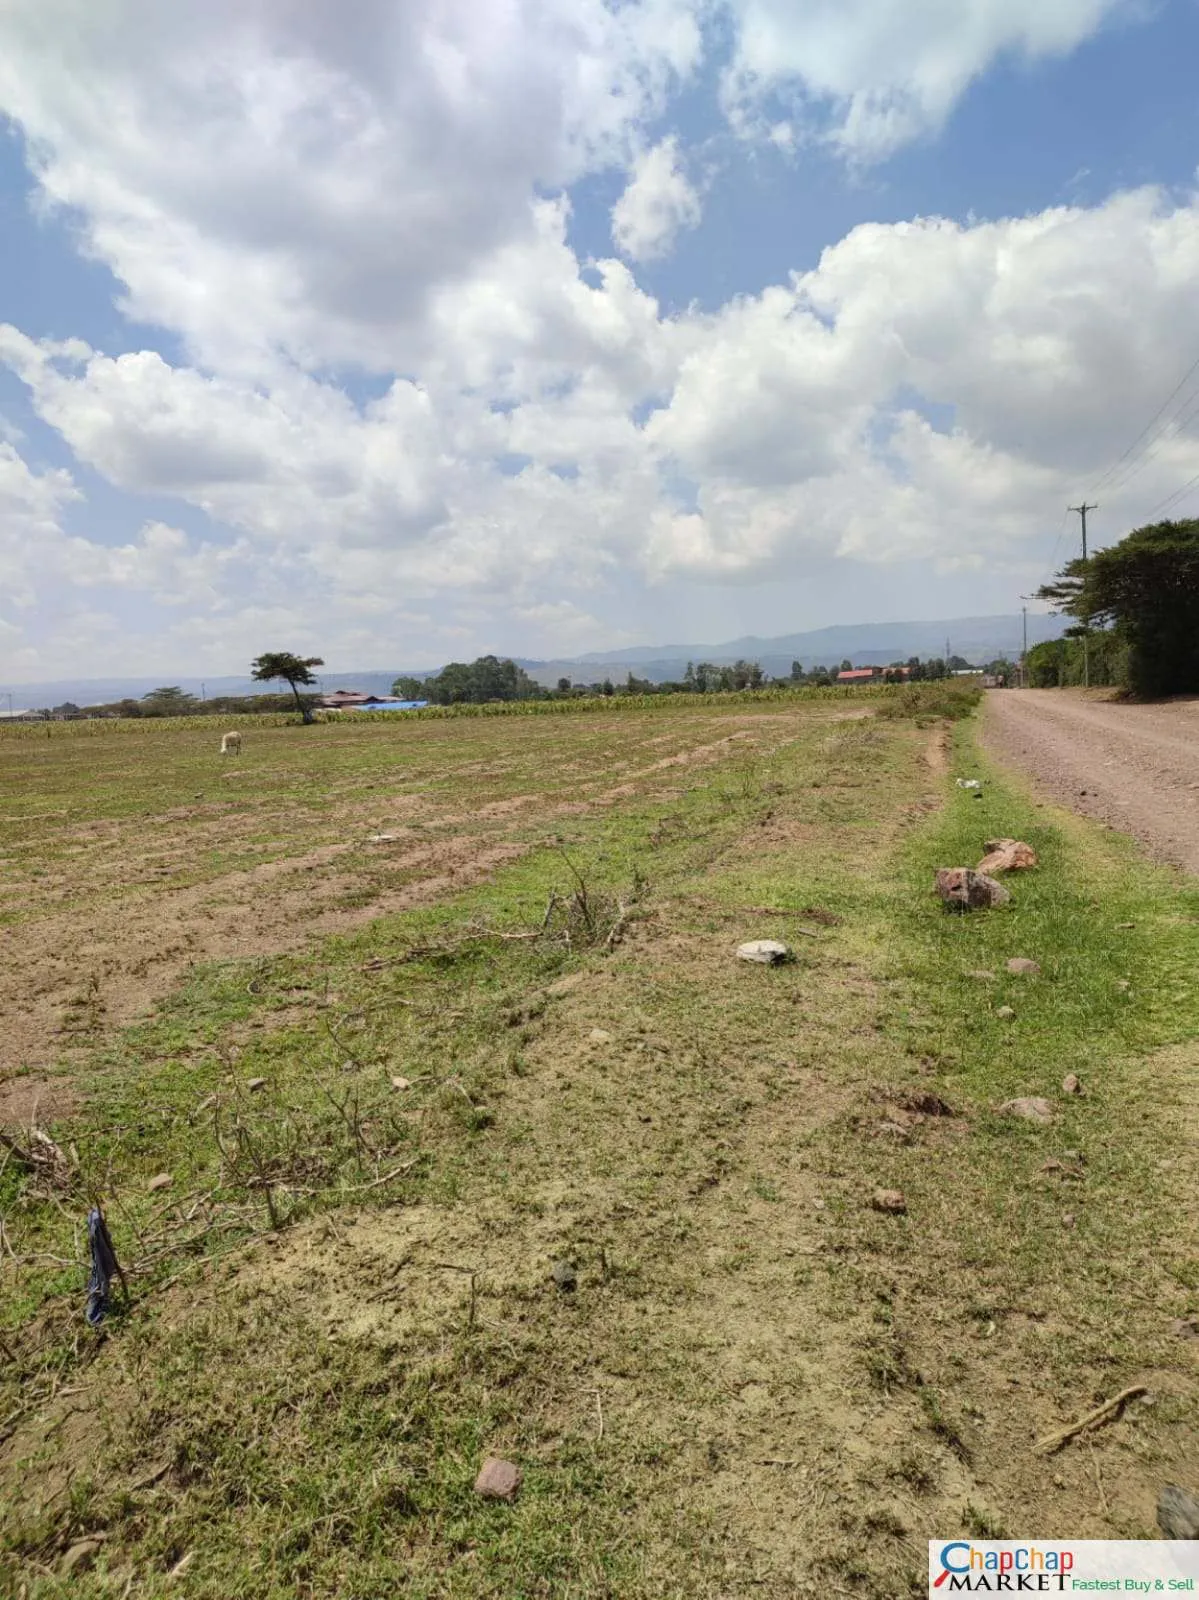 Land For Sale Real Estate-Land for Sale in Nakuru 15 acres for sale Eastgate Nakuru QUICK SALE Clean Title Deed 8